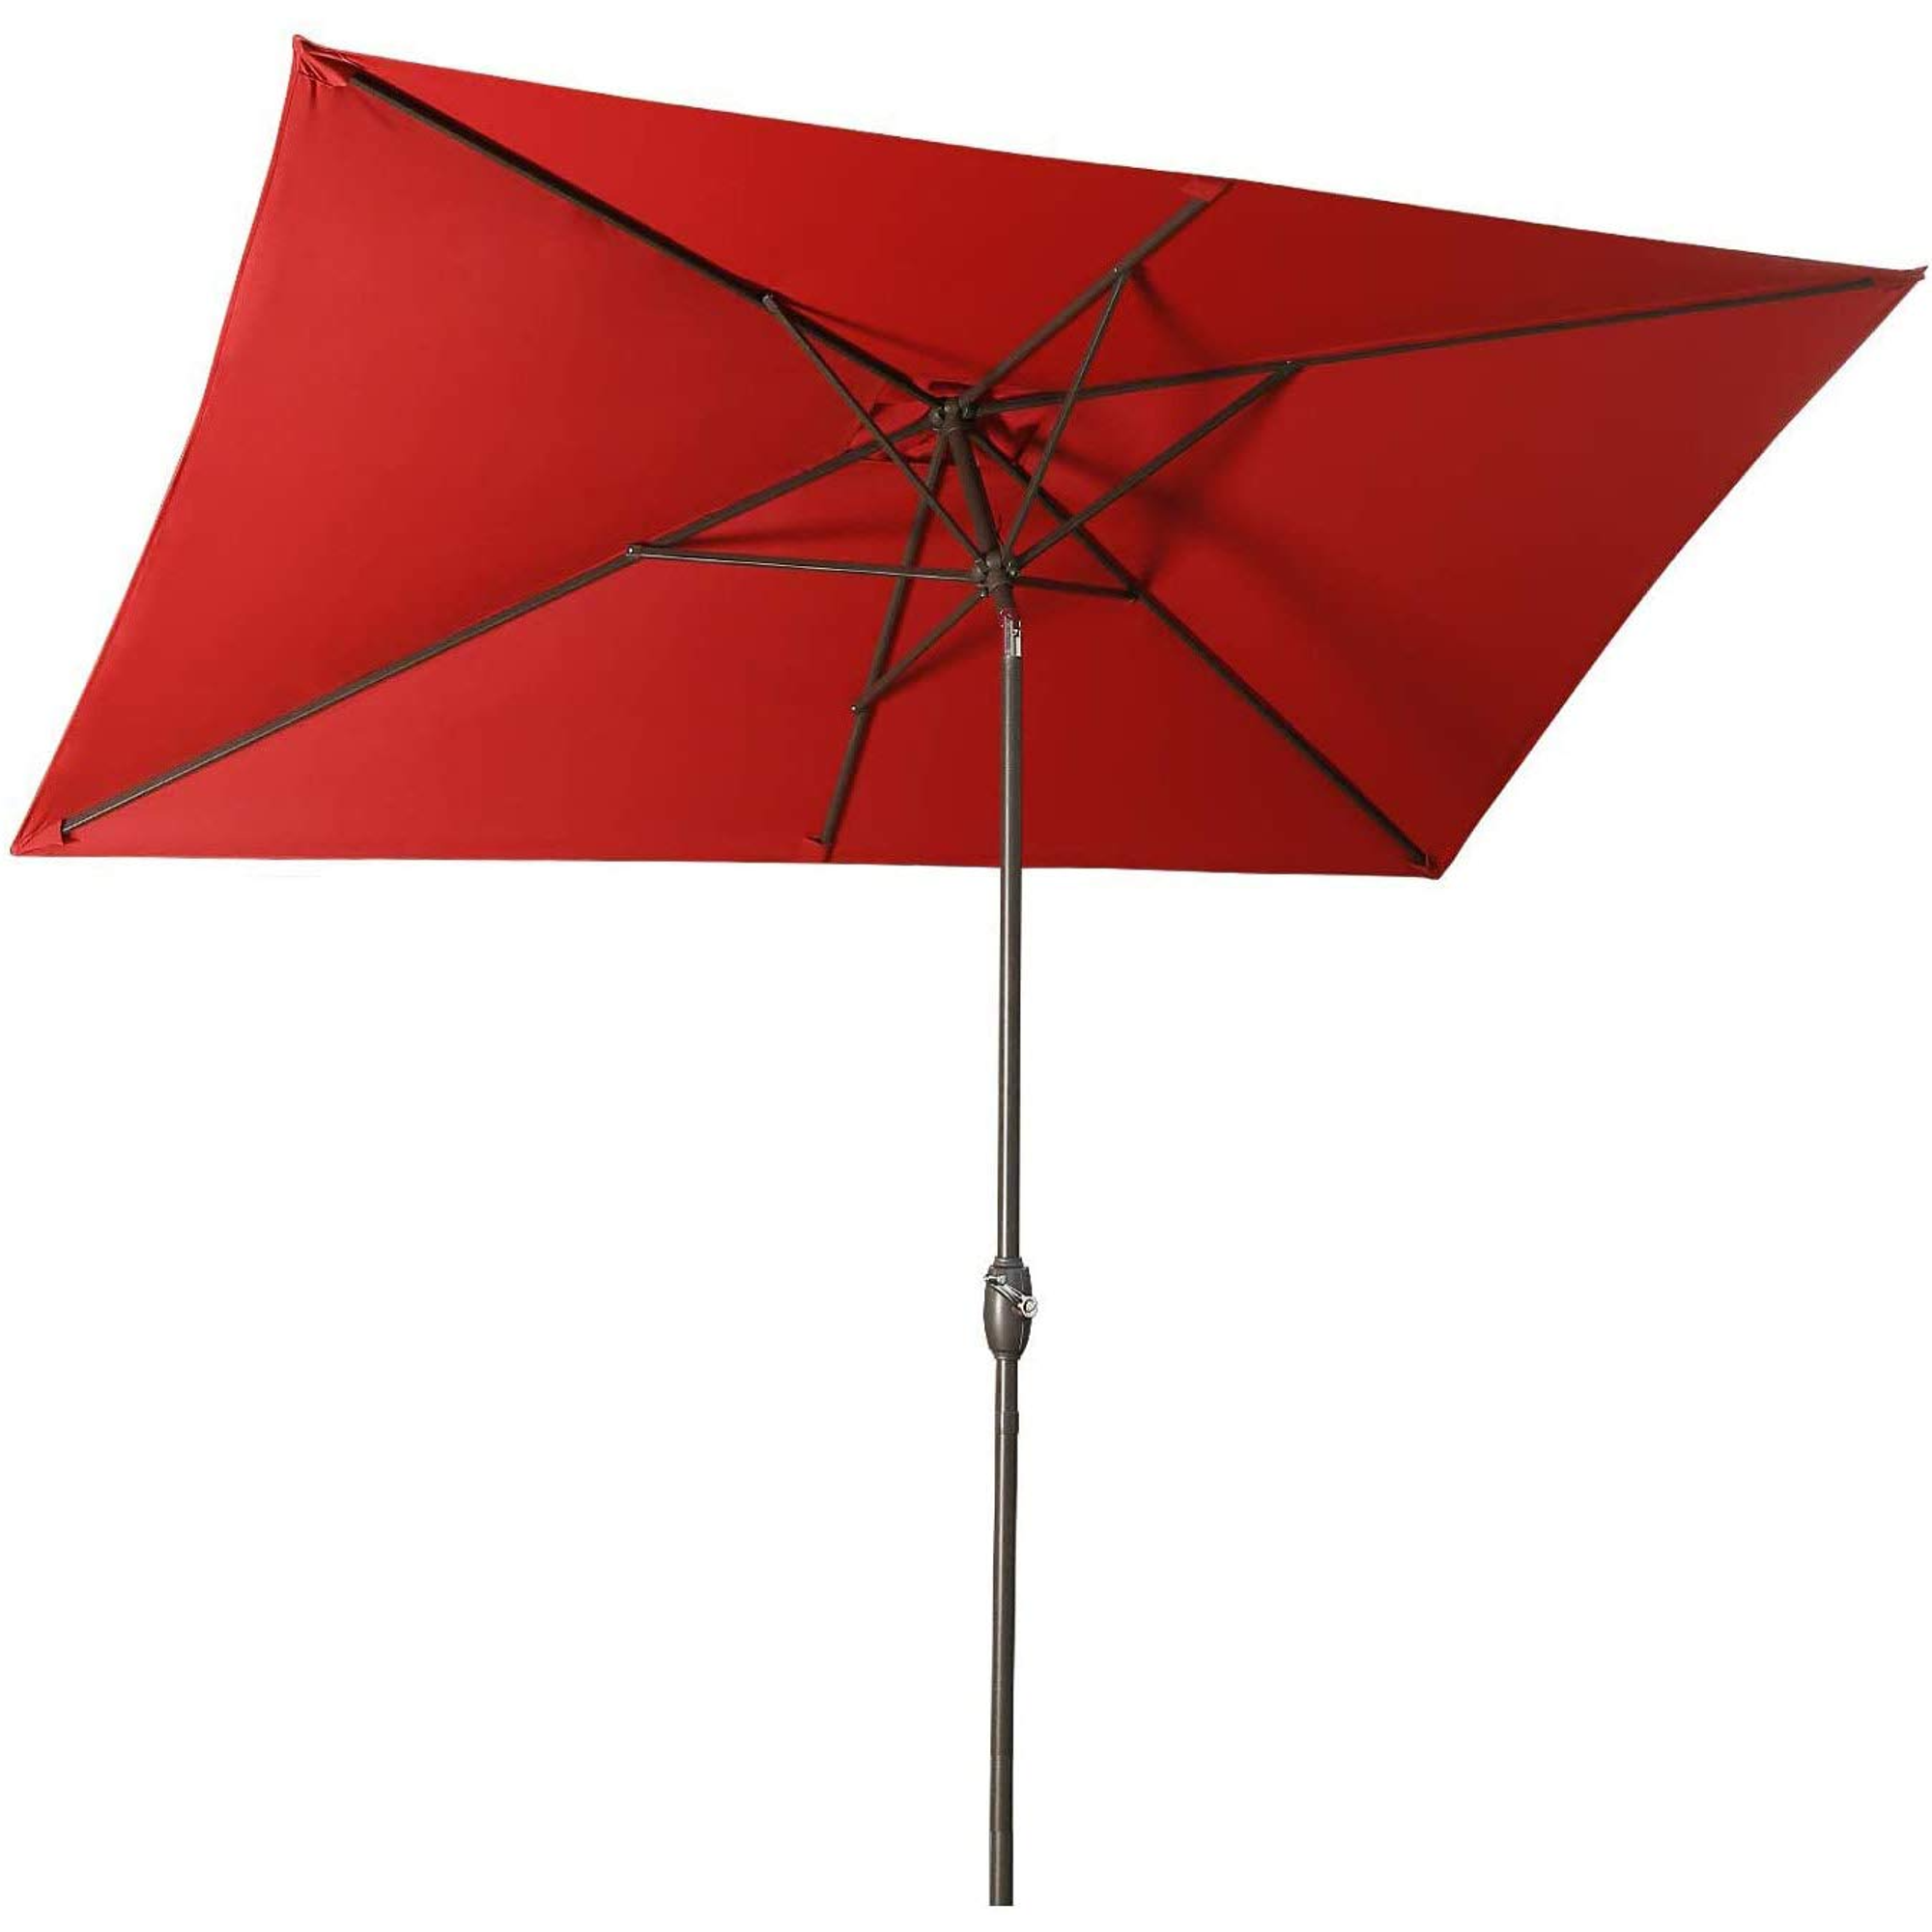 Rectangular Patio Umbrella 6.5 ft. x 10 ft. with Tilt, Crank and 6 Sturdy Ribs for Deck, Lawn, Pool Red